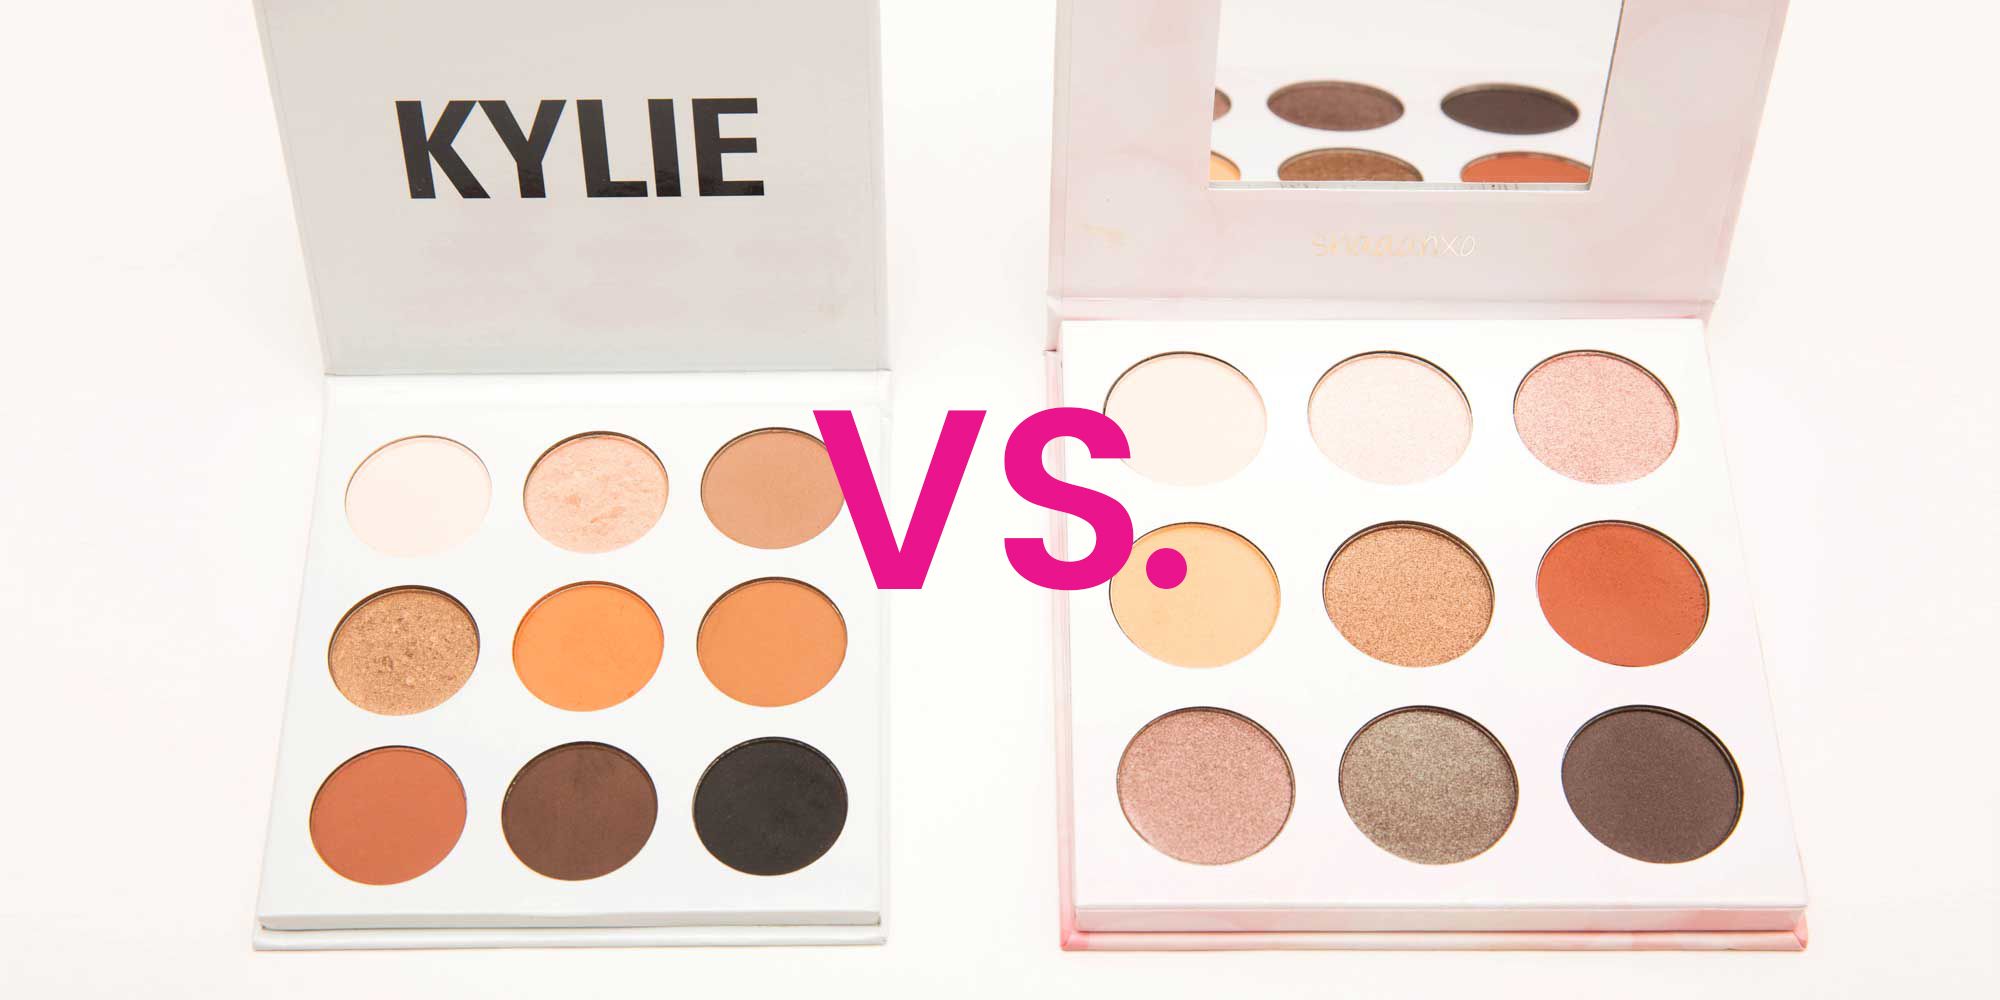 Kylie Cosmetics Kyshadow Palette Compared to Shaaanxo BH Cosmetics Eye Palette